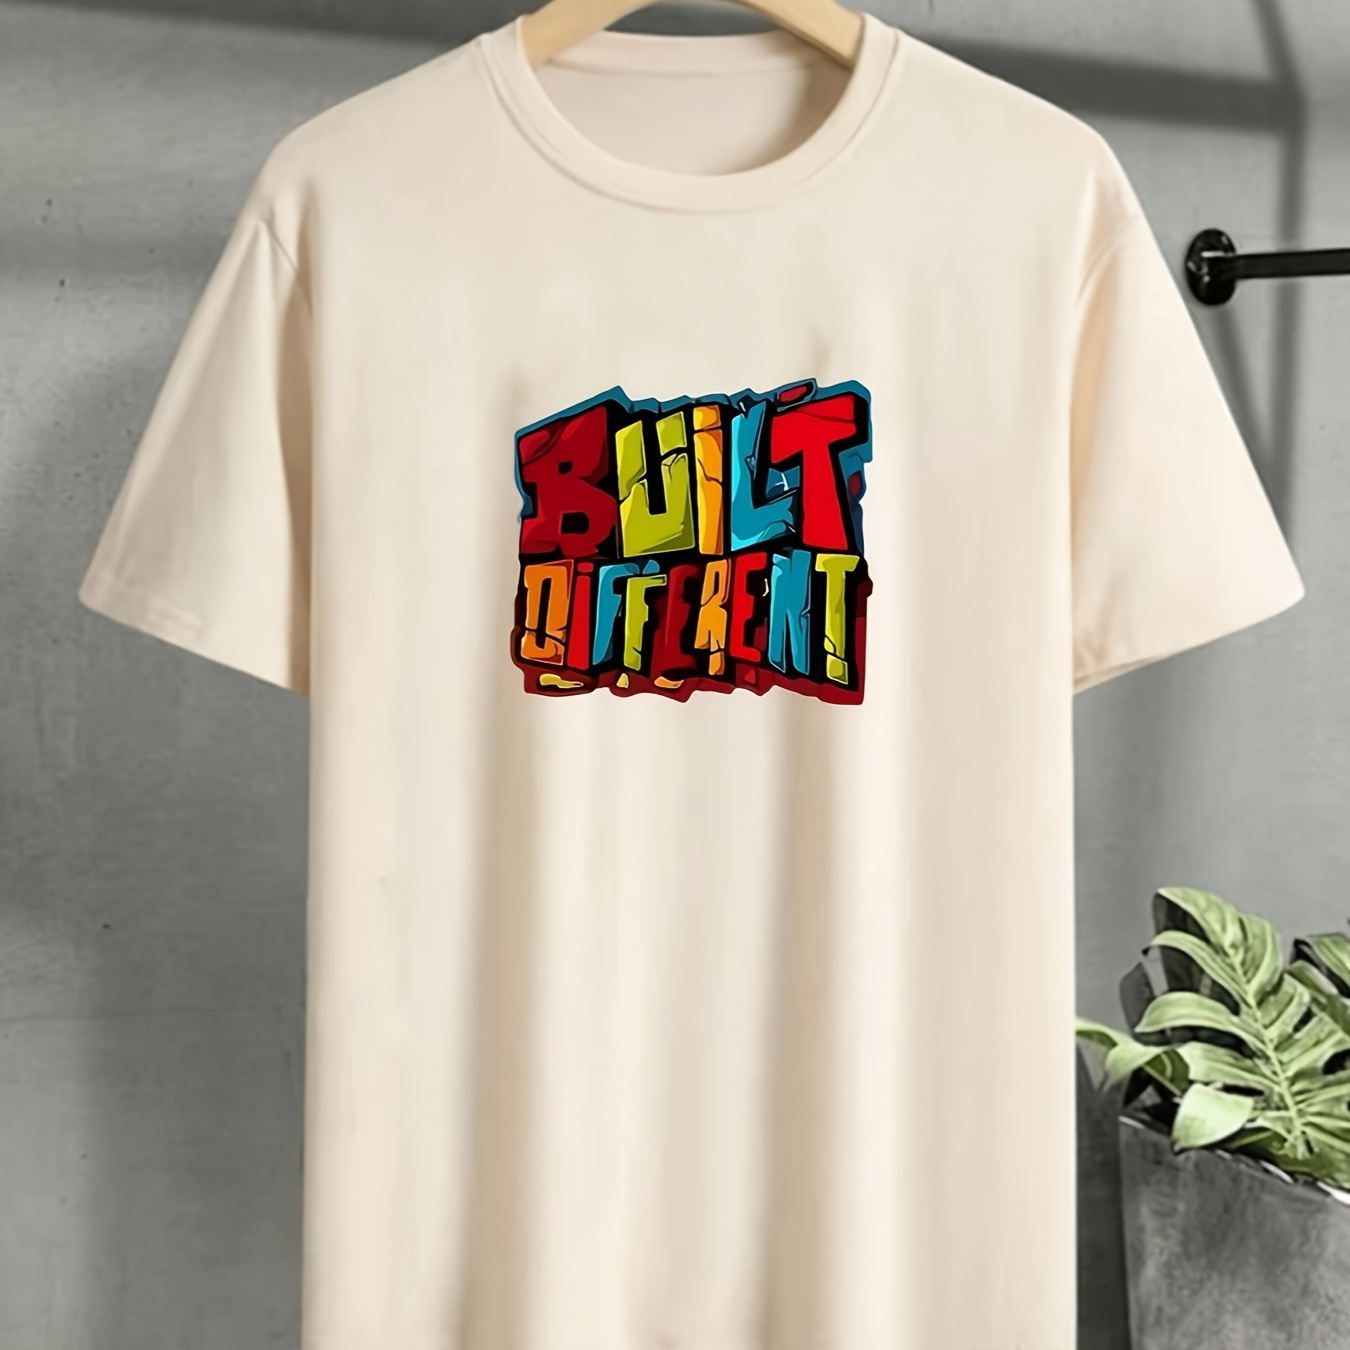 

90s Vibes 'built Different' Print Boy's Short Sleeve T-shirt Breathable Loose Comfortable Crew Neck Creative Pattern Casual Top